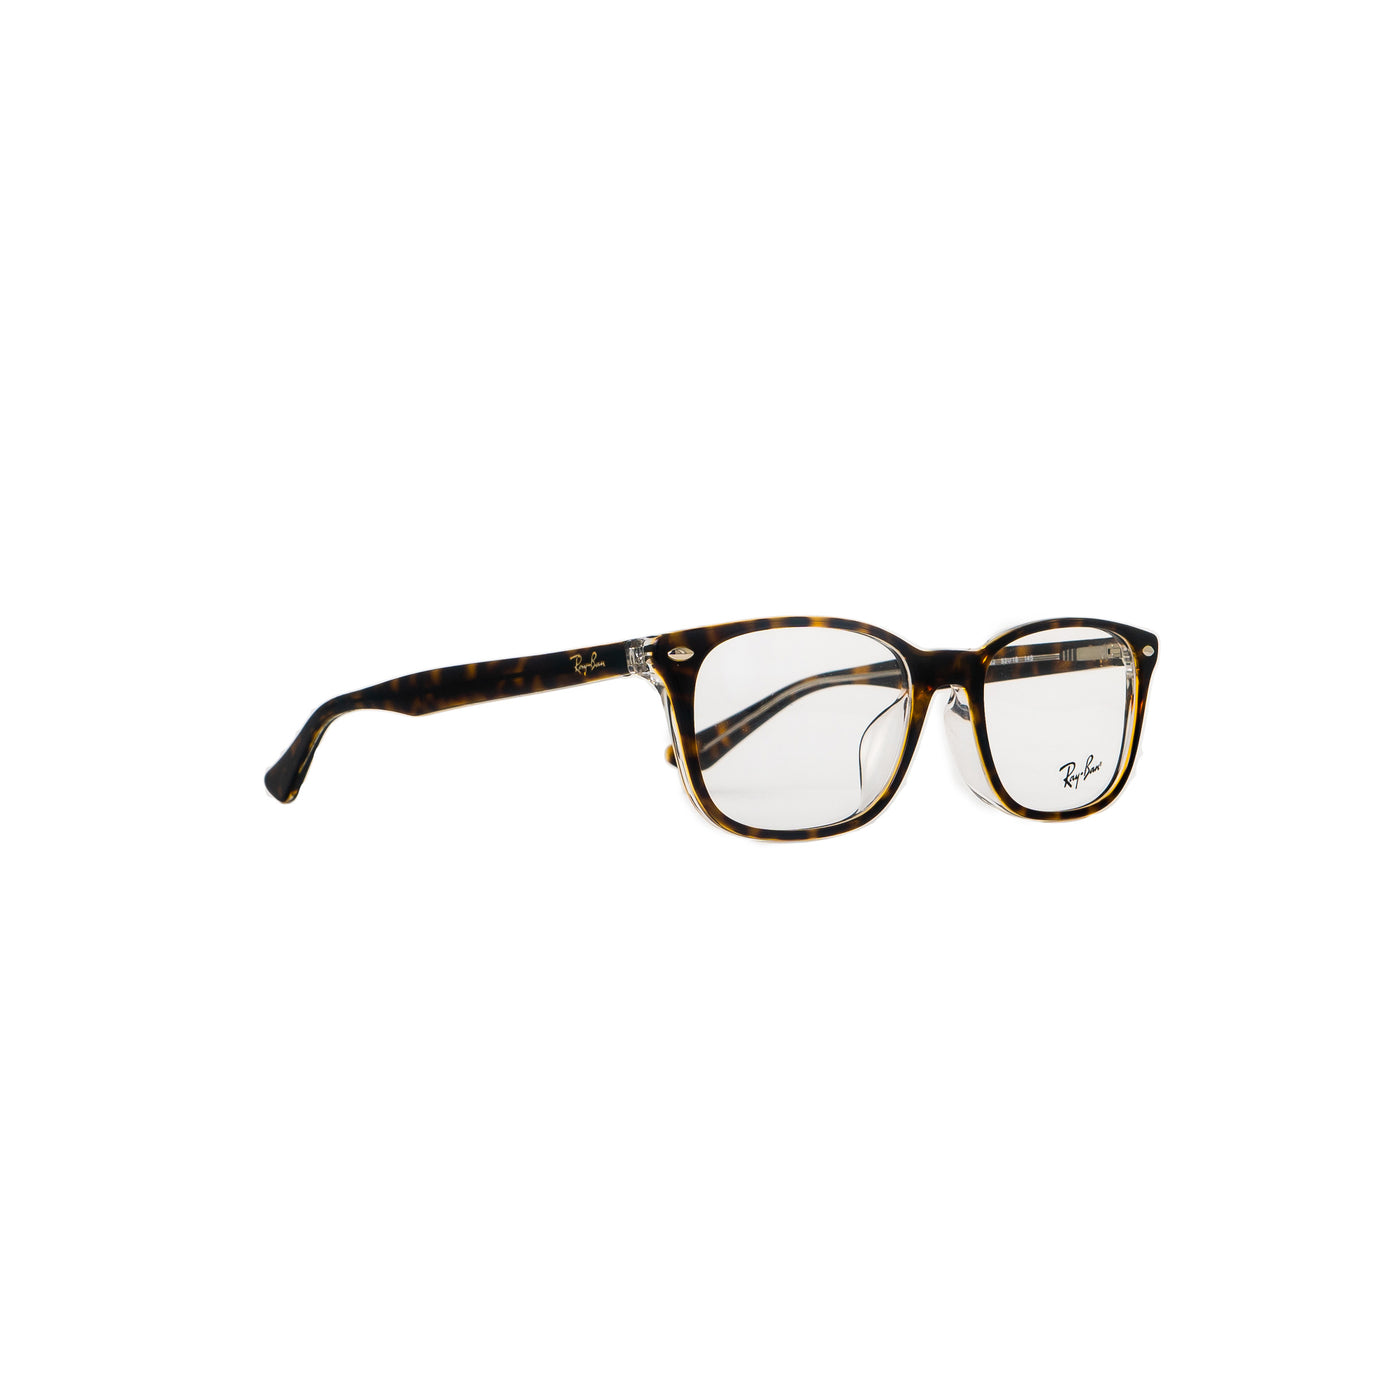 Ray-Ban RB5375F508253 | Eyeglasses - Vision Express Optical Philippines